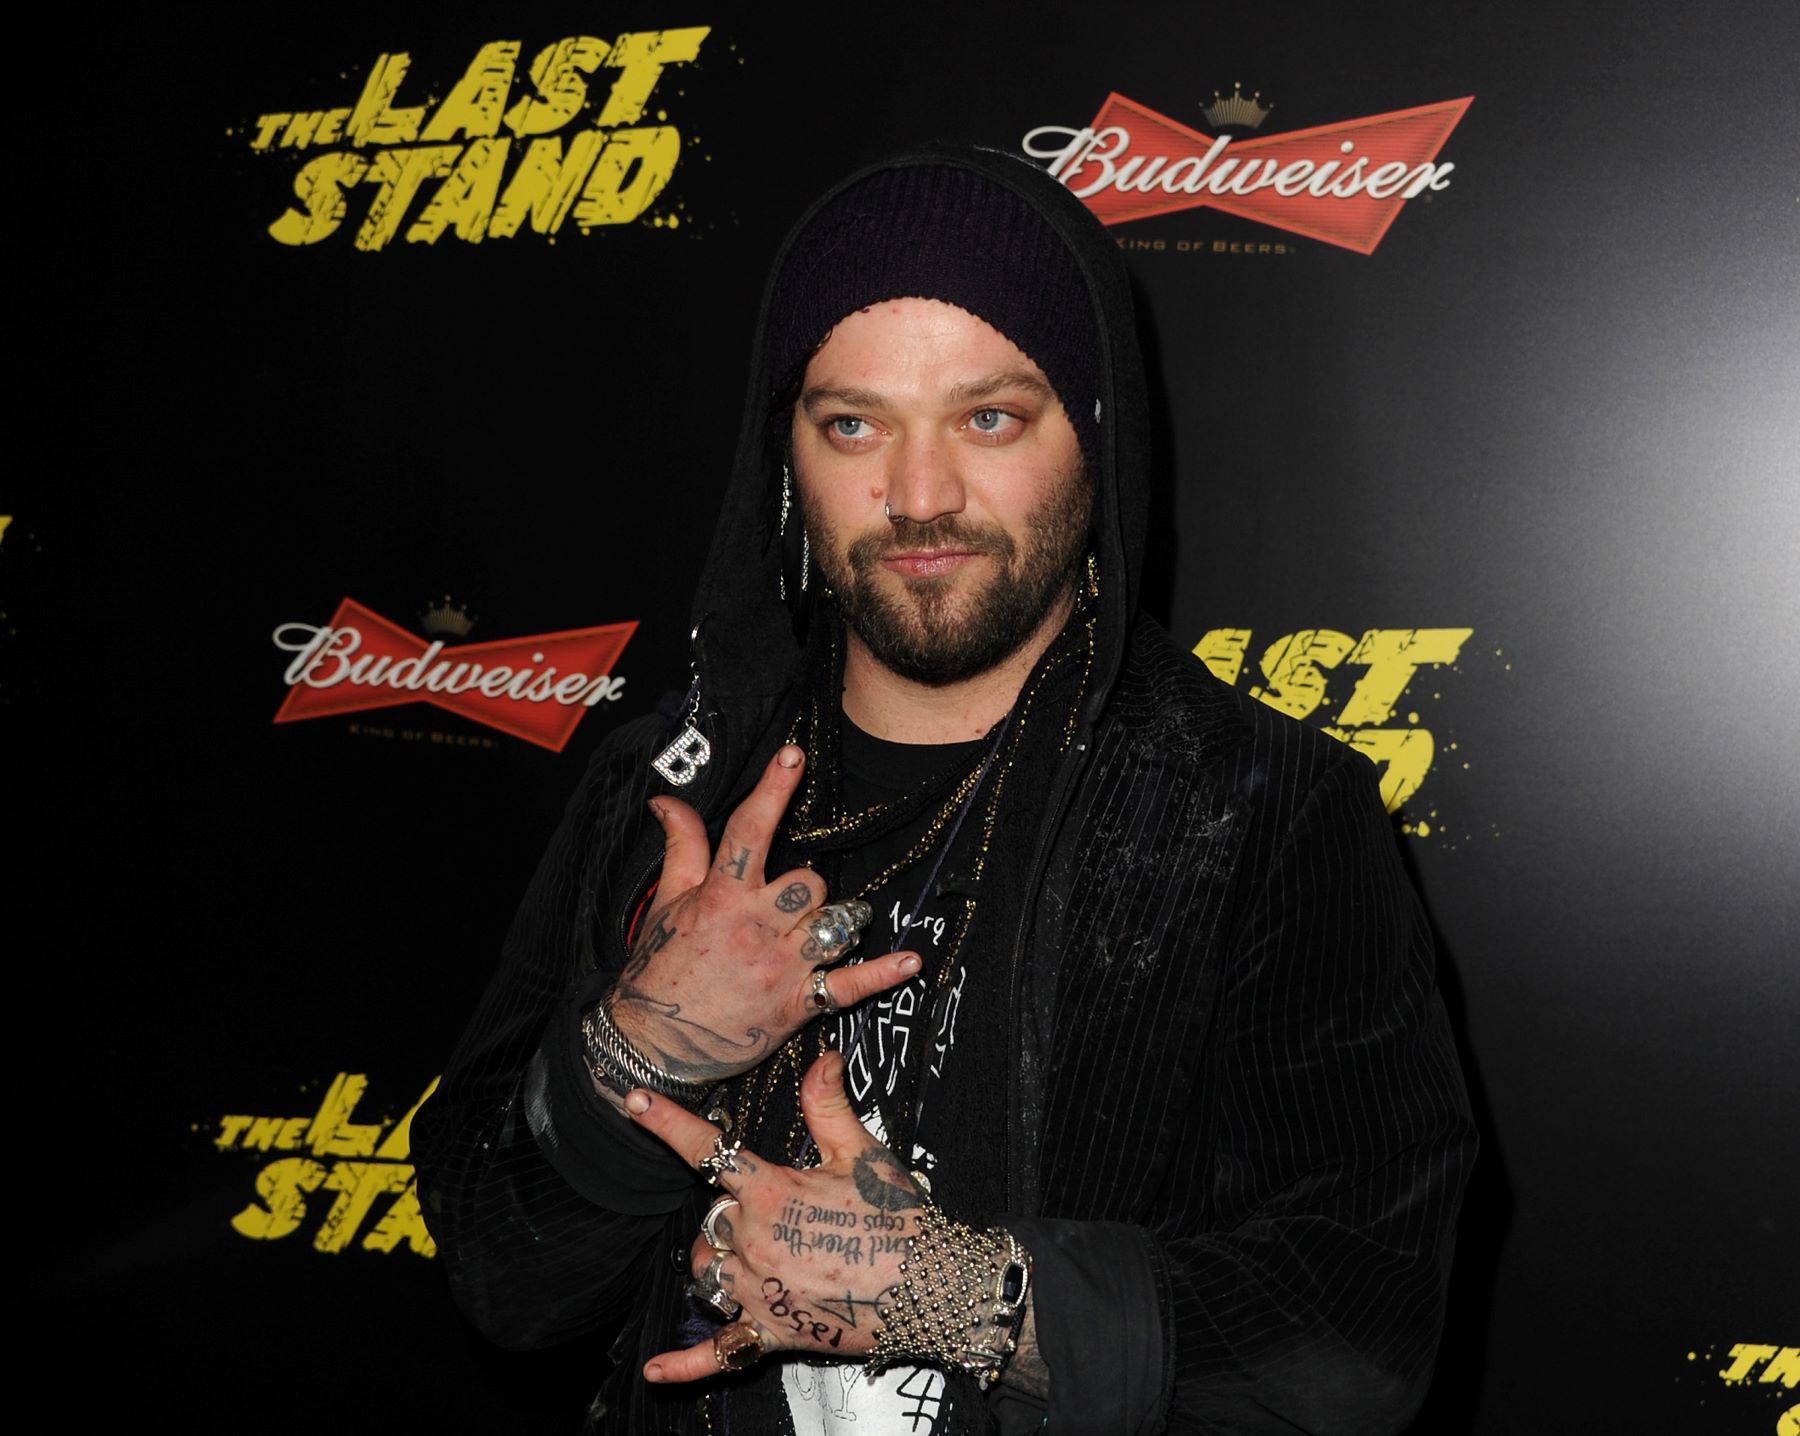 Bam Margera at the Lionsgate Films premiere of 'The Last Stand'